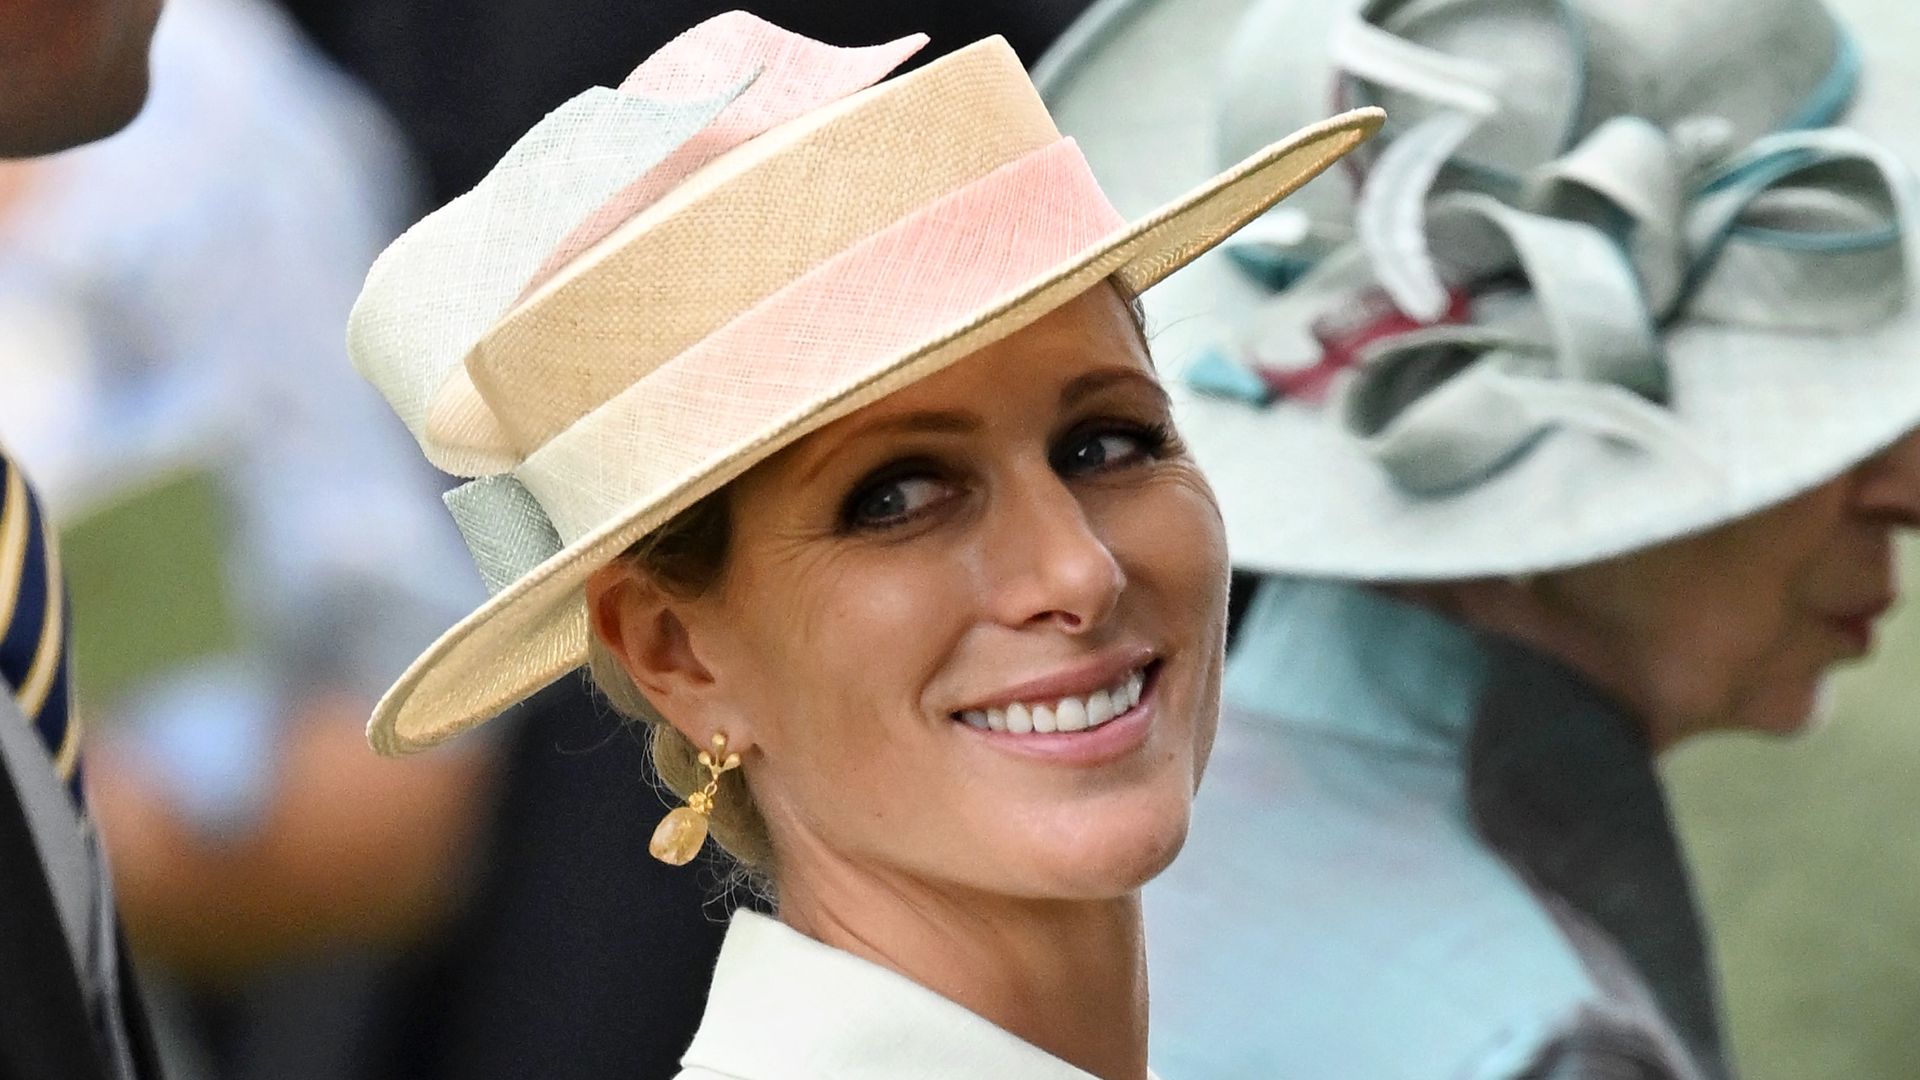 Zara Tindall attends day one of Royal Ascot 2023 at Ascot Racecourse on June 20, 2023 in Ascot, England.